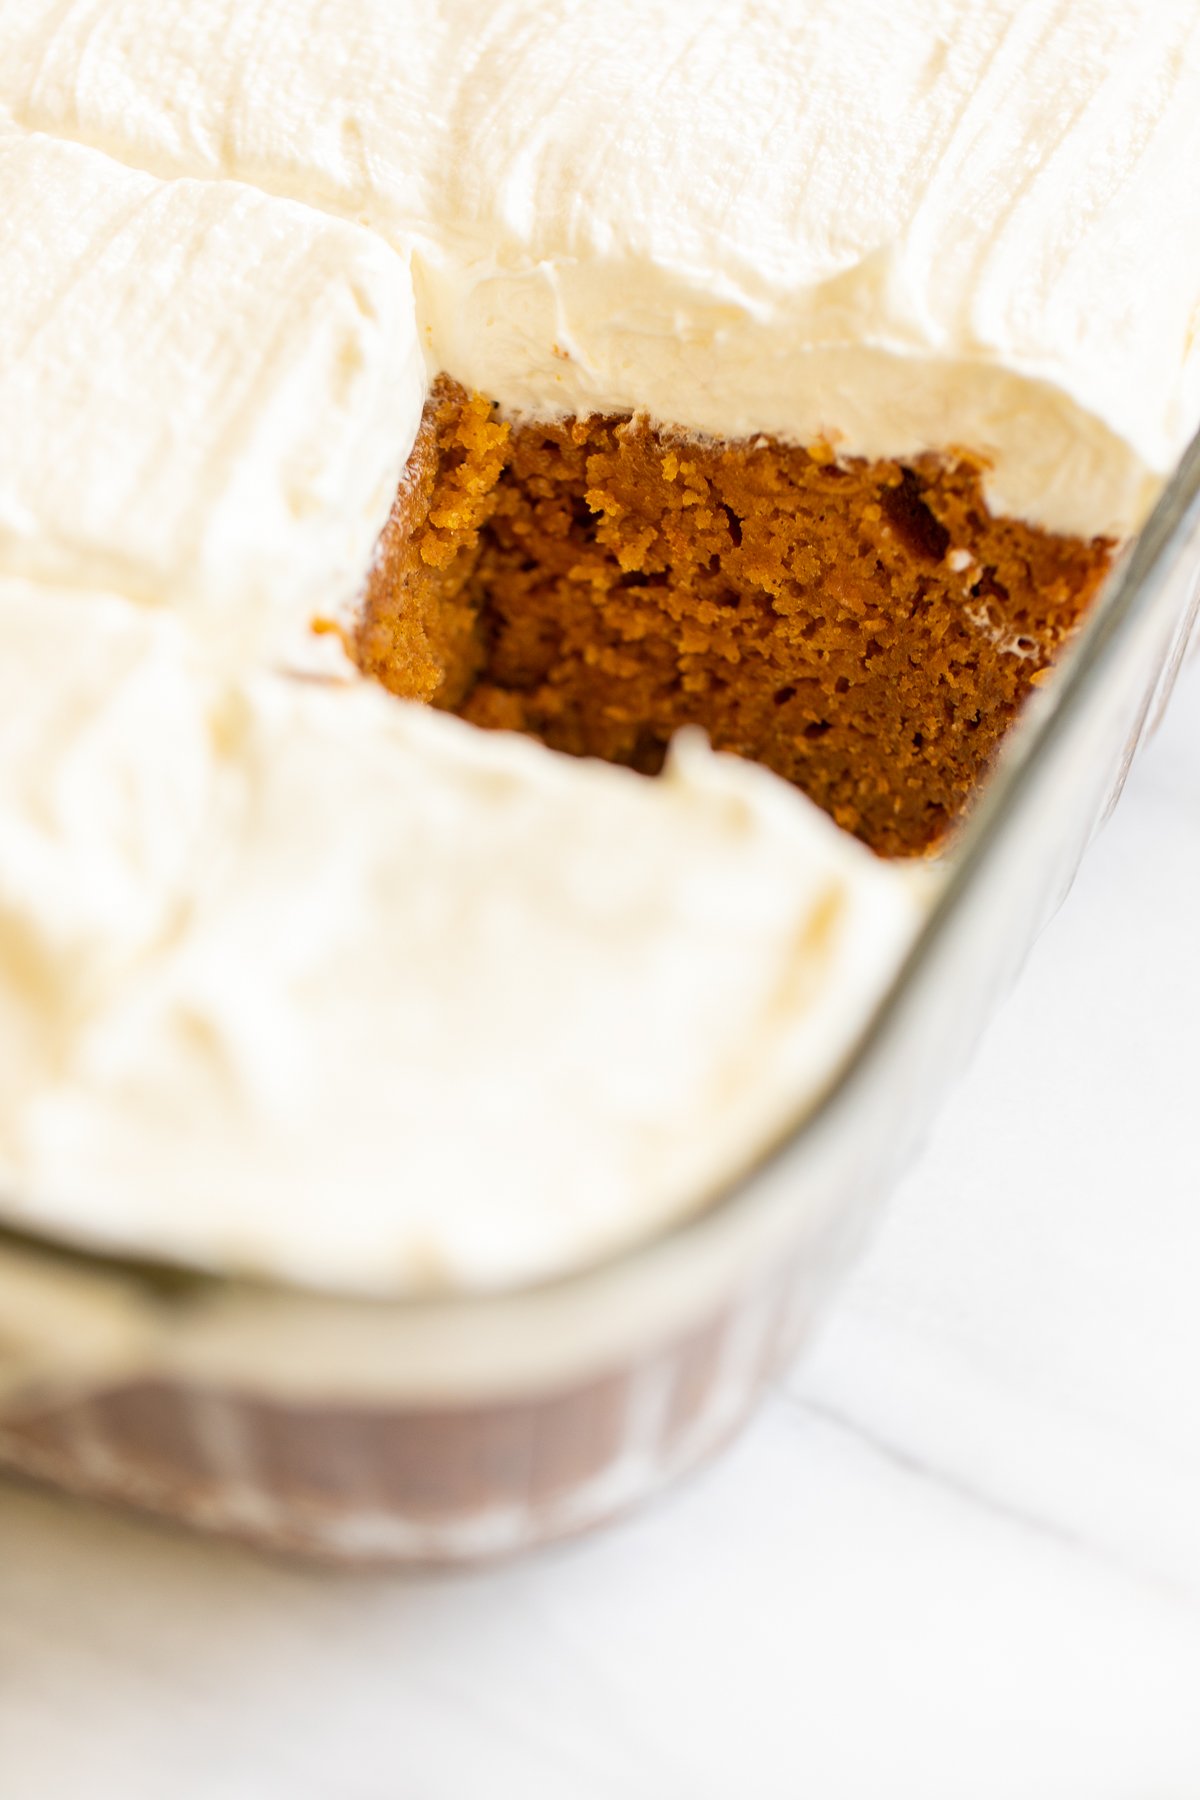 A slice of pumpkin cake with cream cheese frosting in a glass dish.